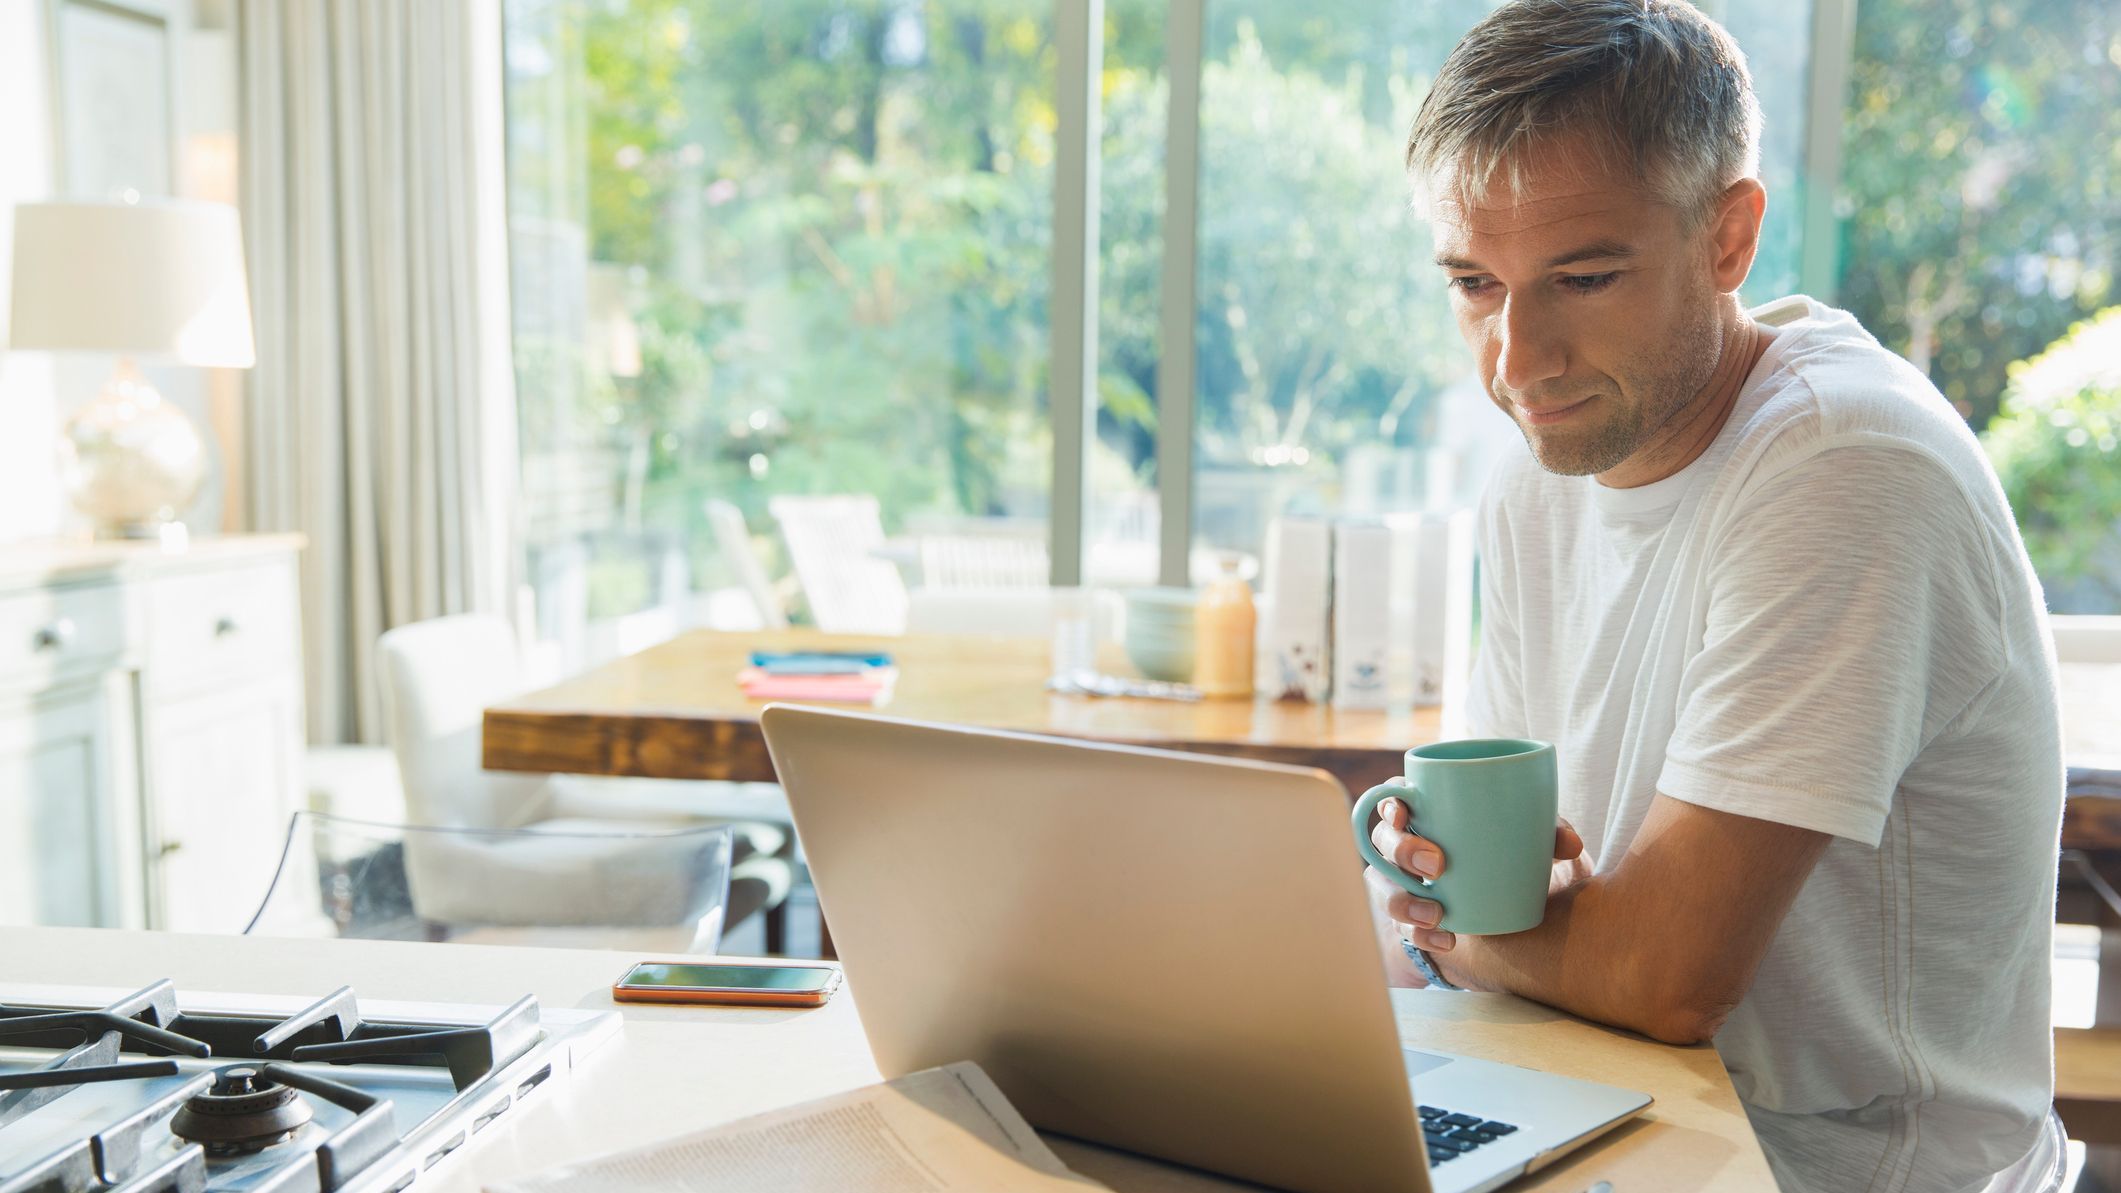 A semi-retired worker checks his email and enjoys a cup of coffee.